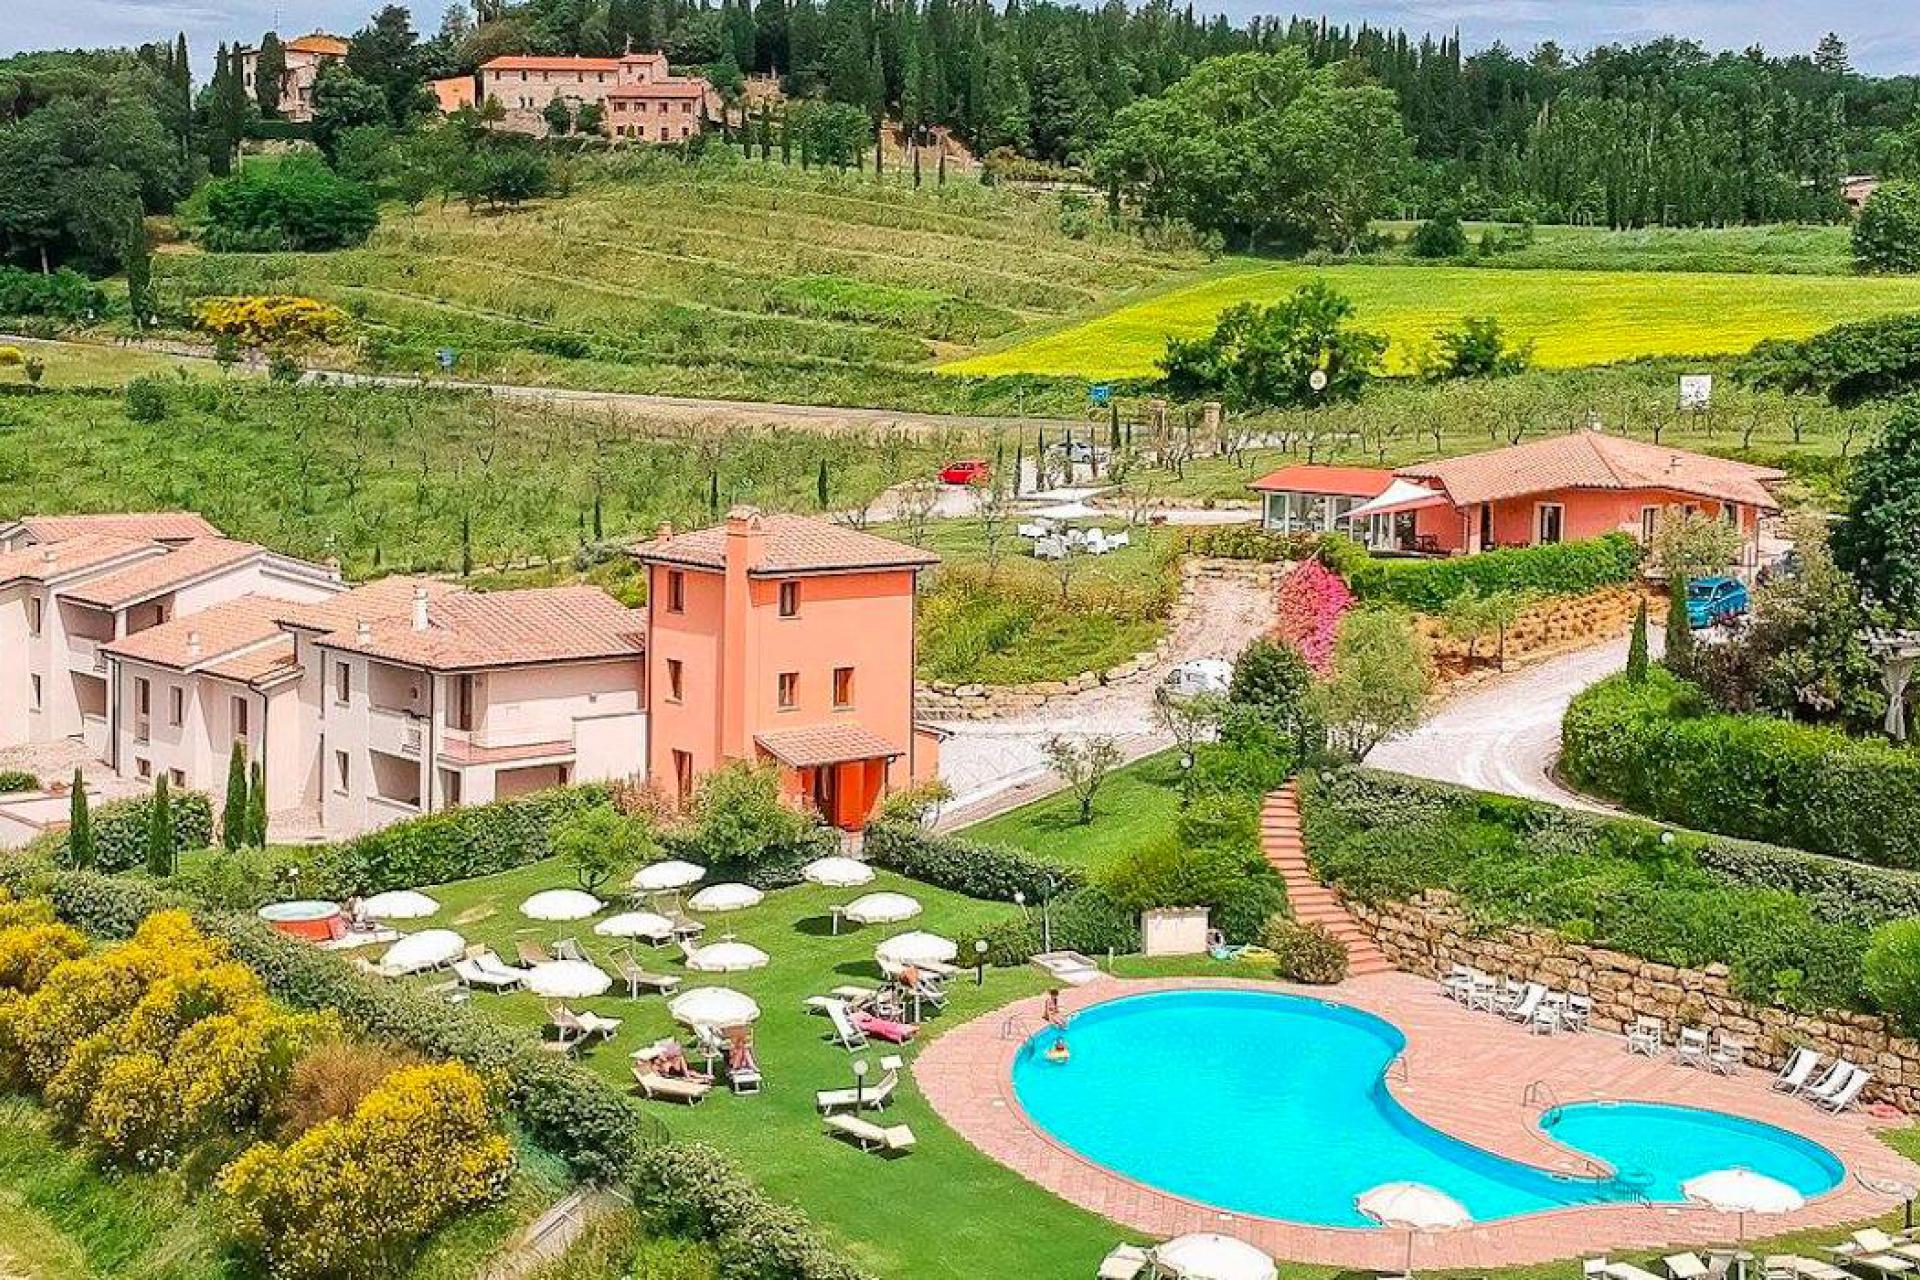 Large agriturismo with modern apartments